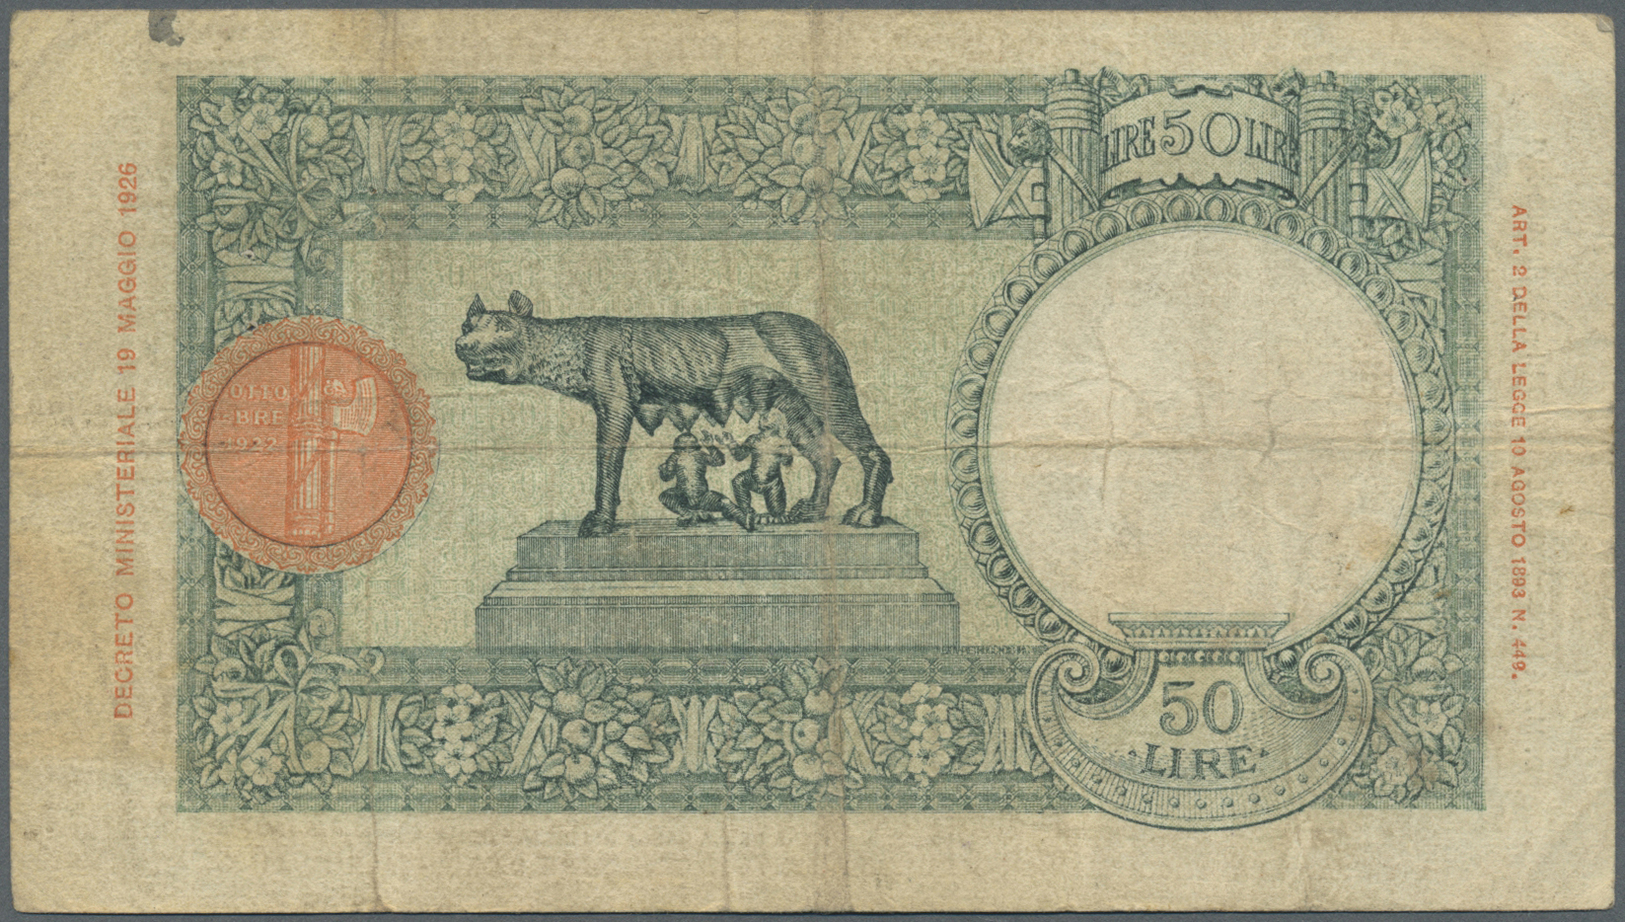 01256 Italian East Africa / Italienisch Ost-Afrika: 50 Lire January 1st 1939, P.1b, Lightly Toned Paper With Some Folds - Italian East Africa